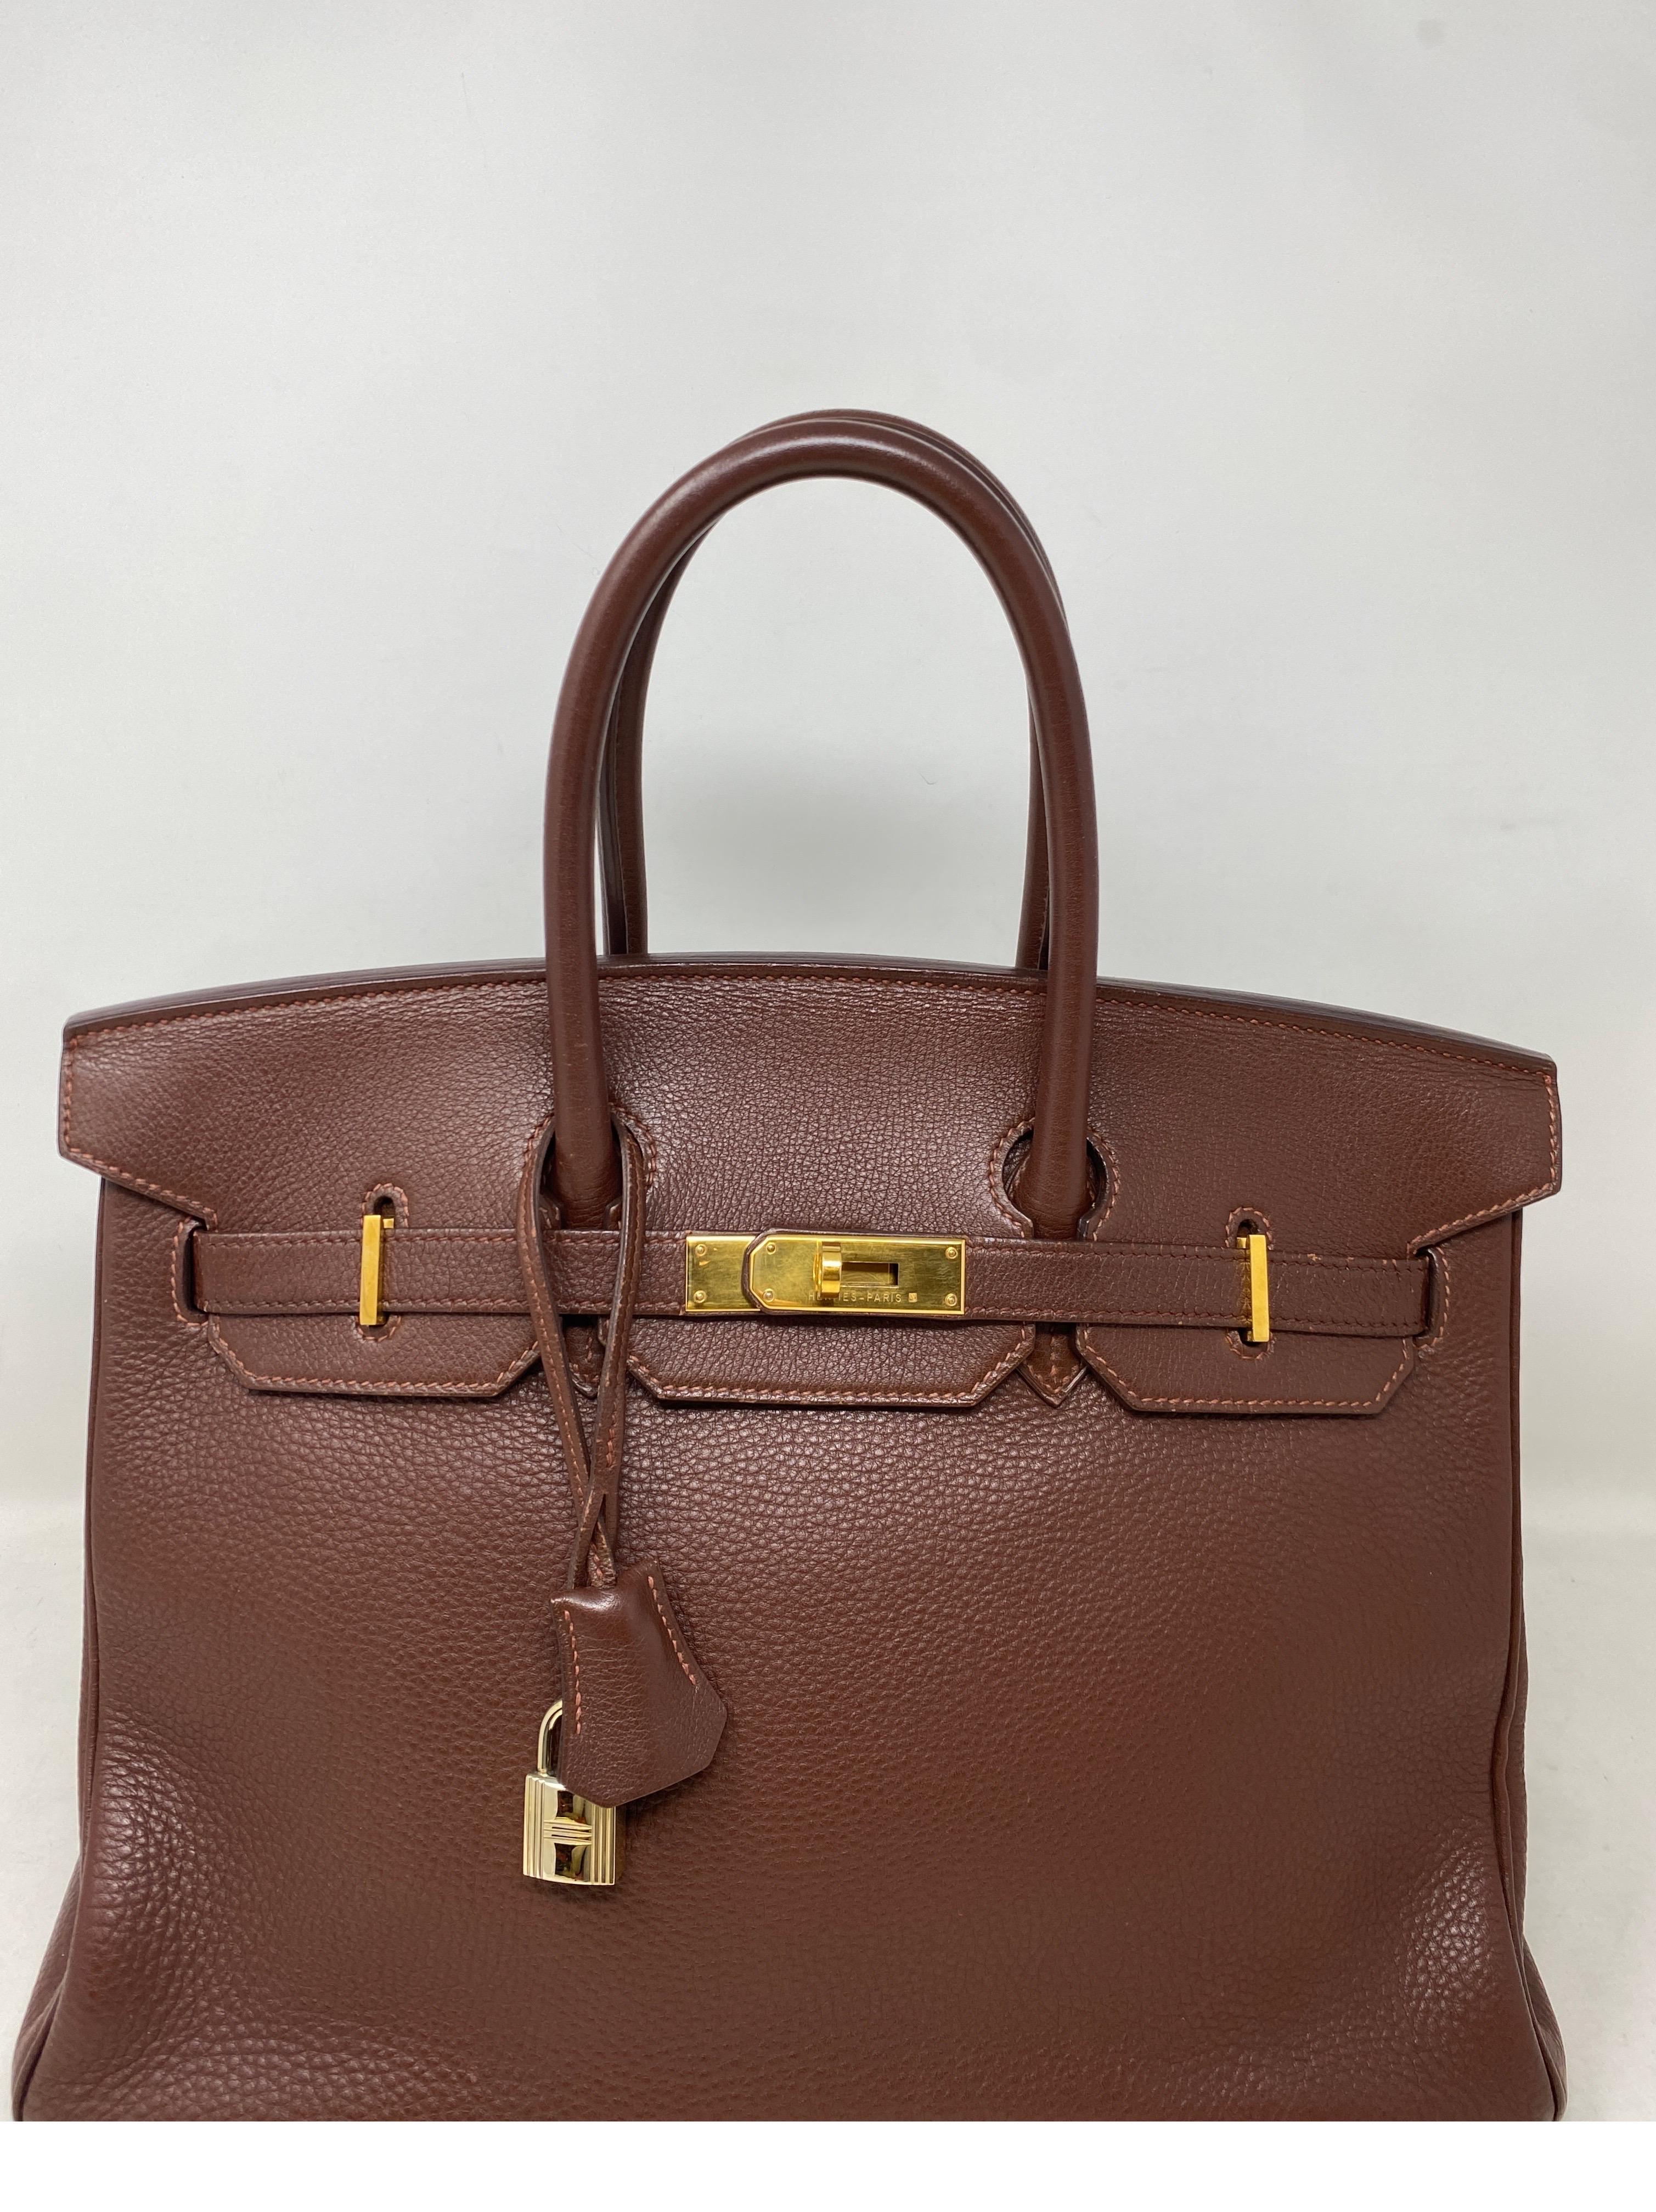 Hermes Brown Birkin 35 Bag. Rich brown color. Gold hardware. Vintage Hermes Birkin. Good condition. Classic bag and a great investment. The quality of Hermes bag is superb and most wanted by collectors. Includes clochette, lock, keys, and dust bag.